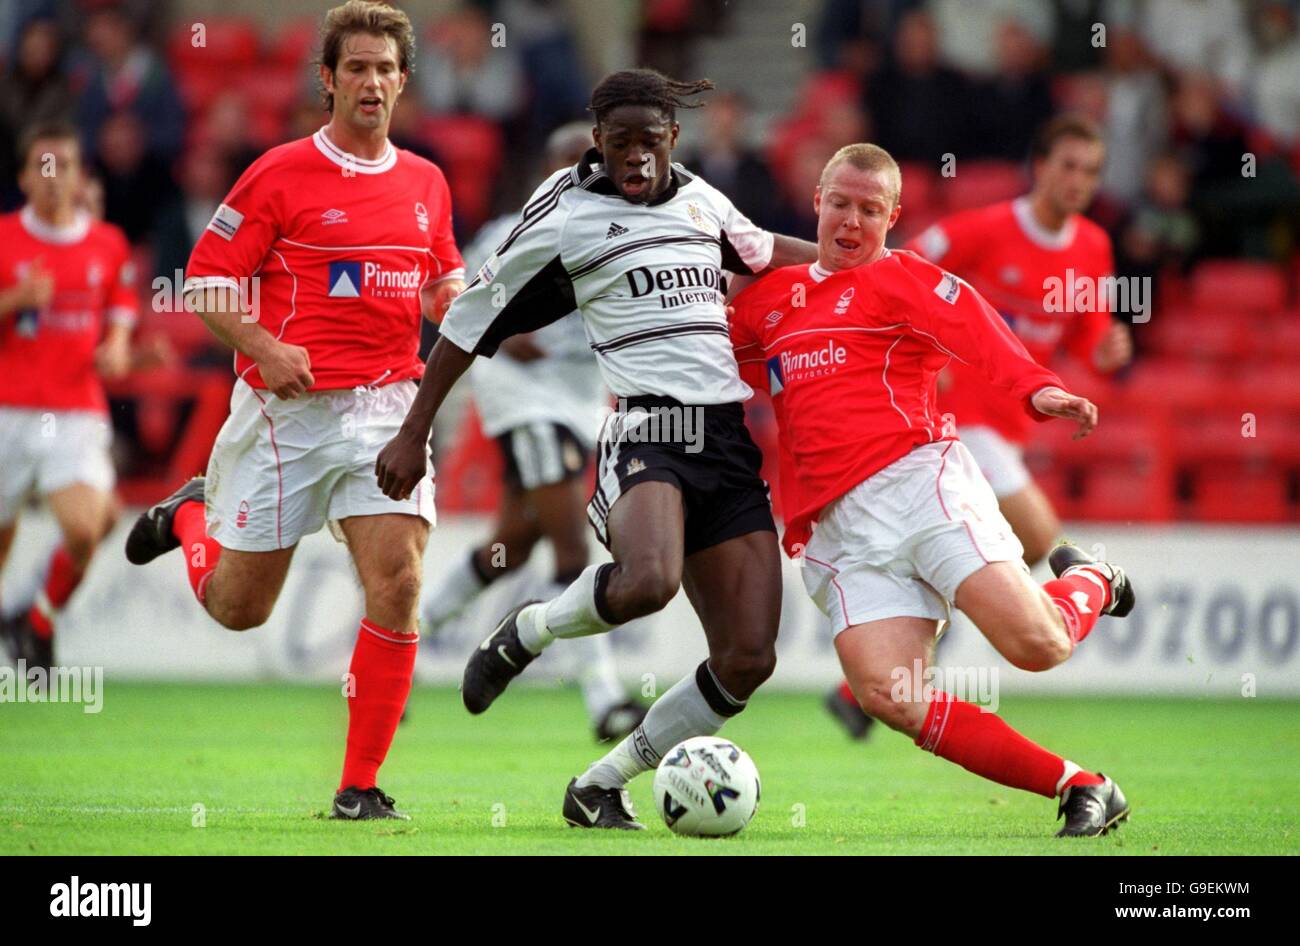 Soccer - Nationwide League Division One - Nottingham Forest v Fulham. Nottingham Forest's Andy Johnson (l) and Tony Vaughan (r) try to tackle Fulham's Louis Saha (c) Stock Photo